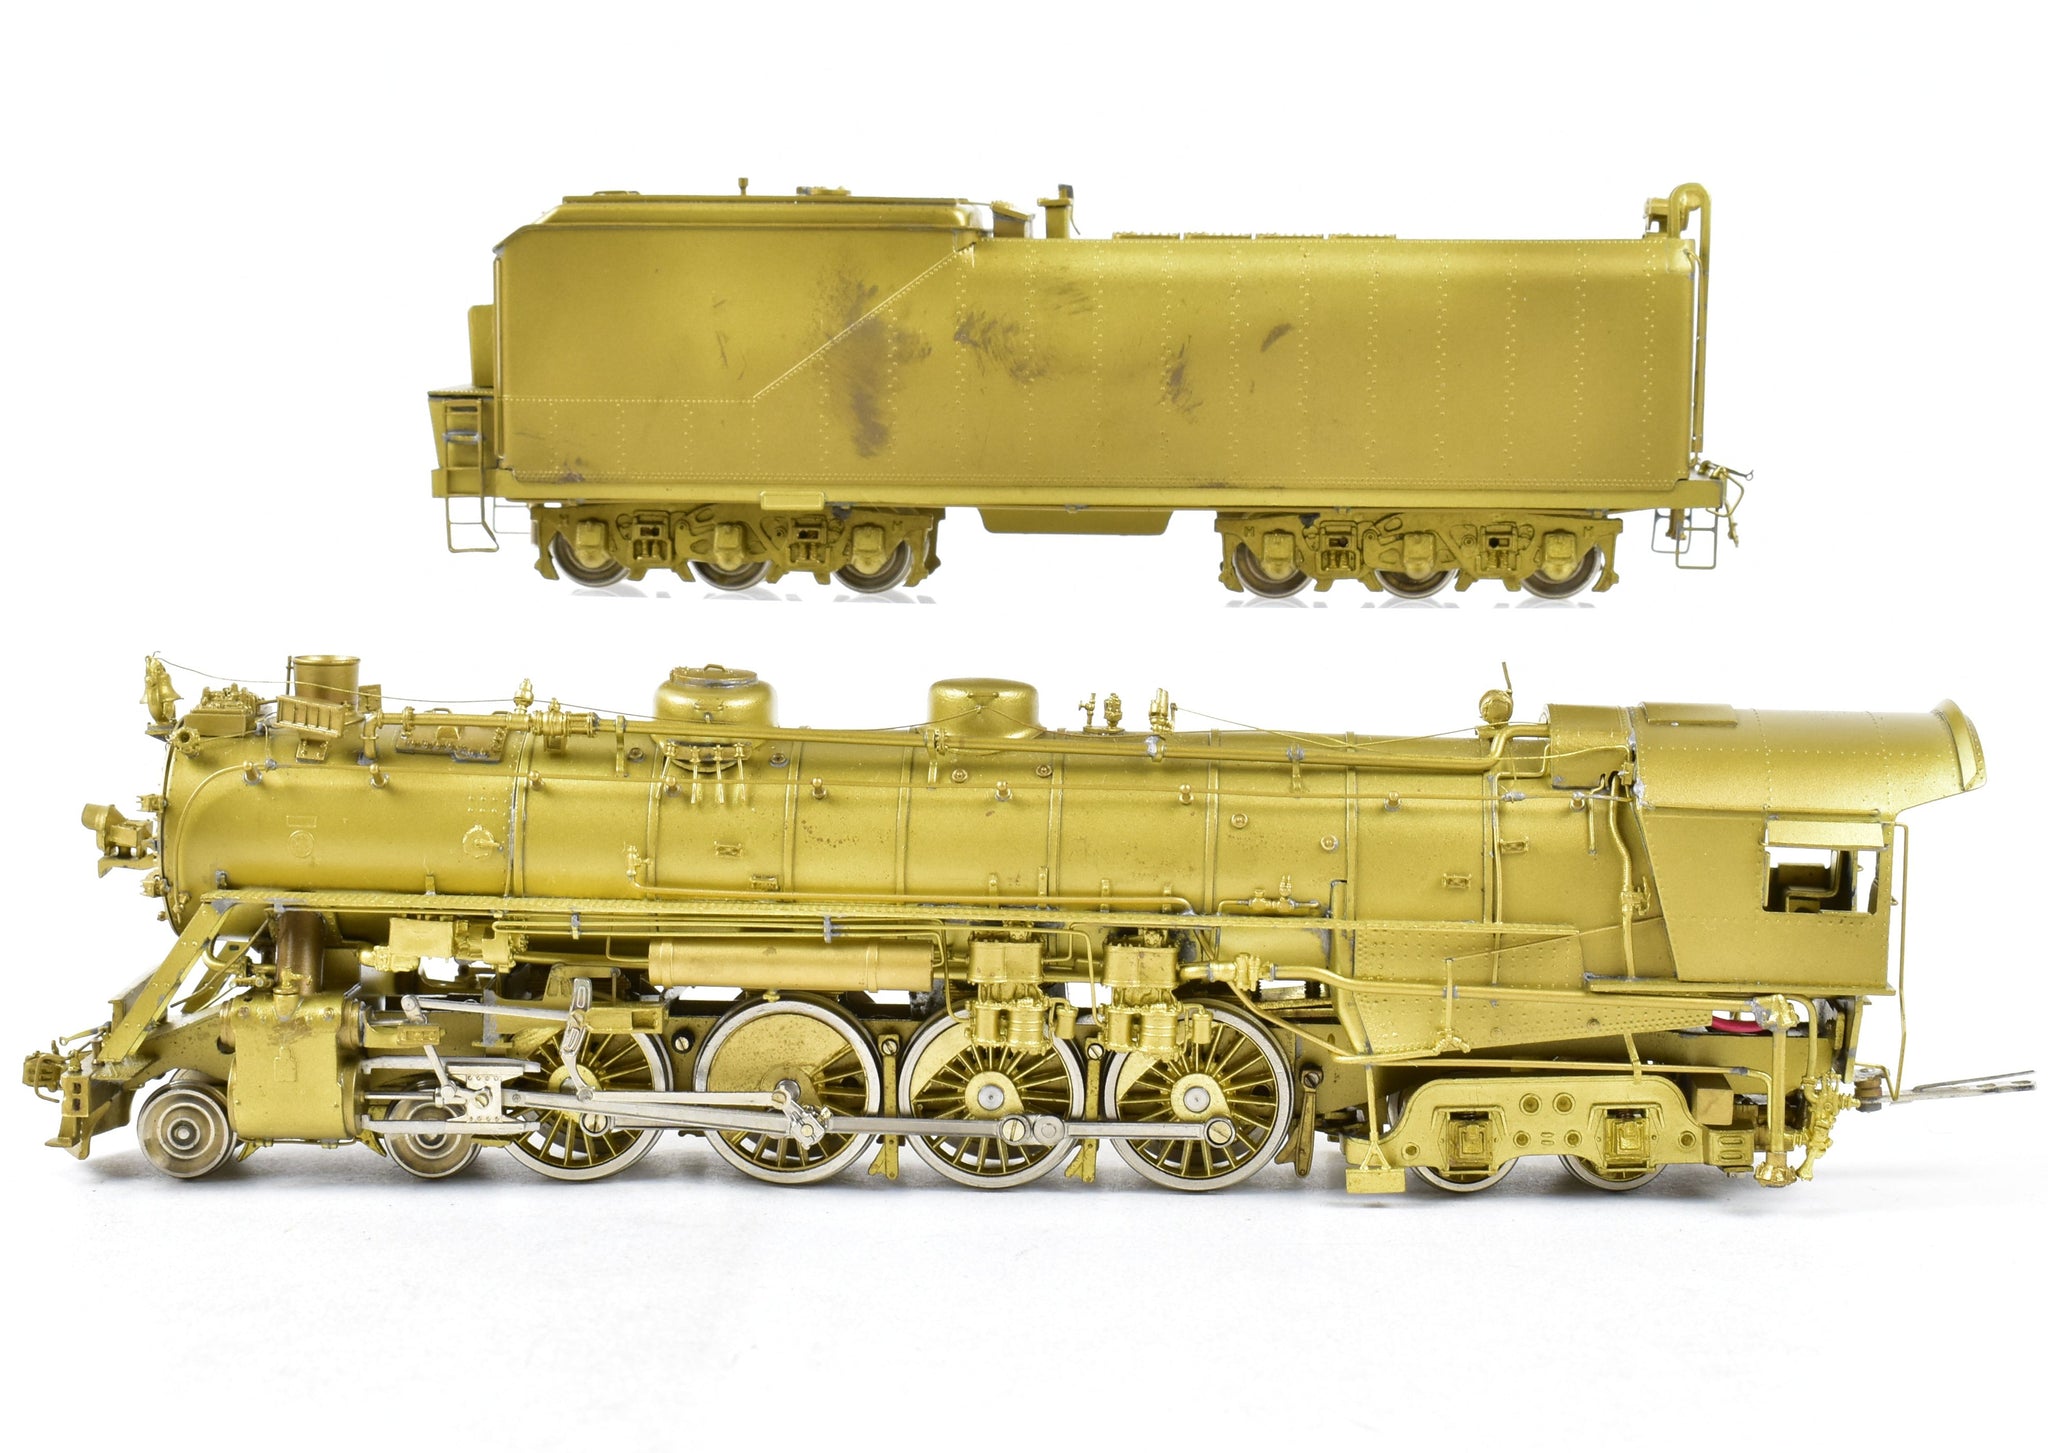 HO Brass Sunset Models SP - Southern Pacific GS-1 4-8-4